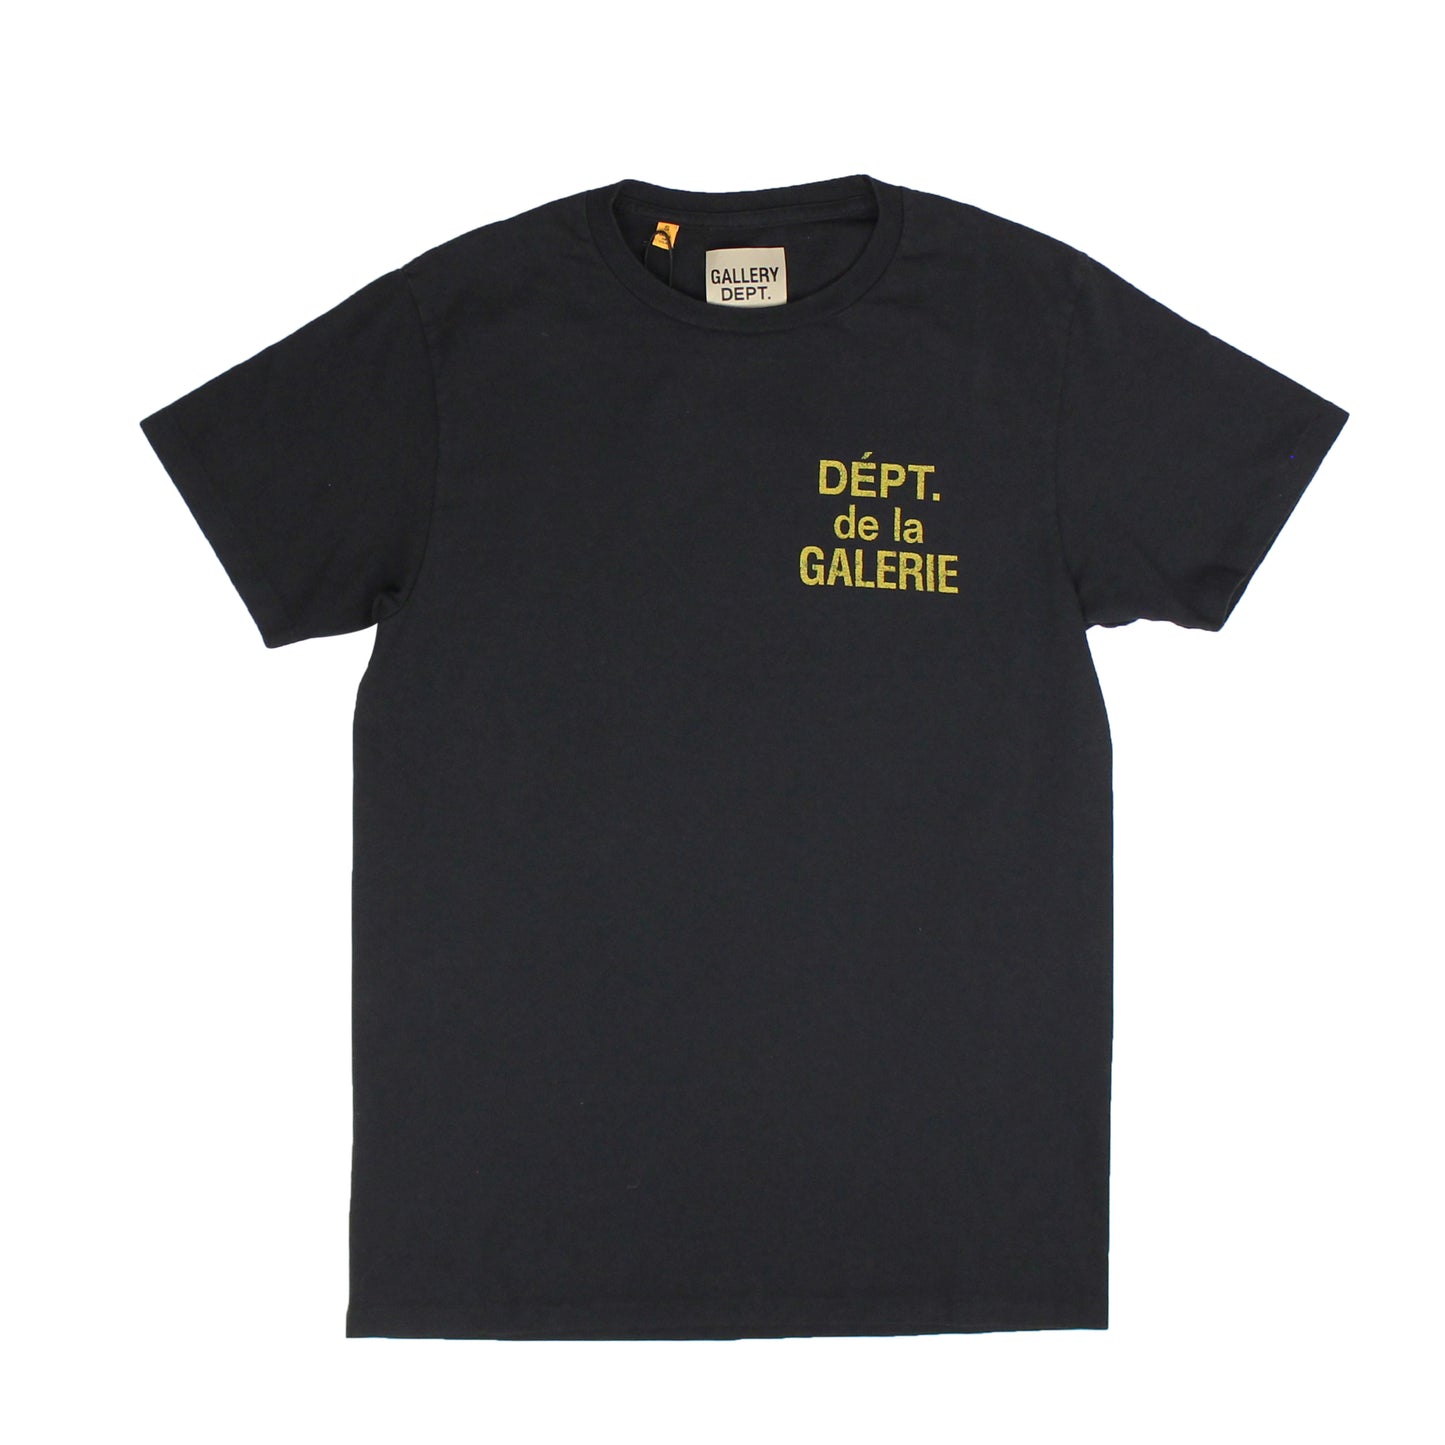 Gallery Dept. French T-Shirt -Black